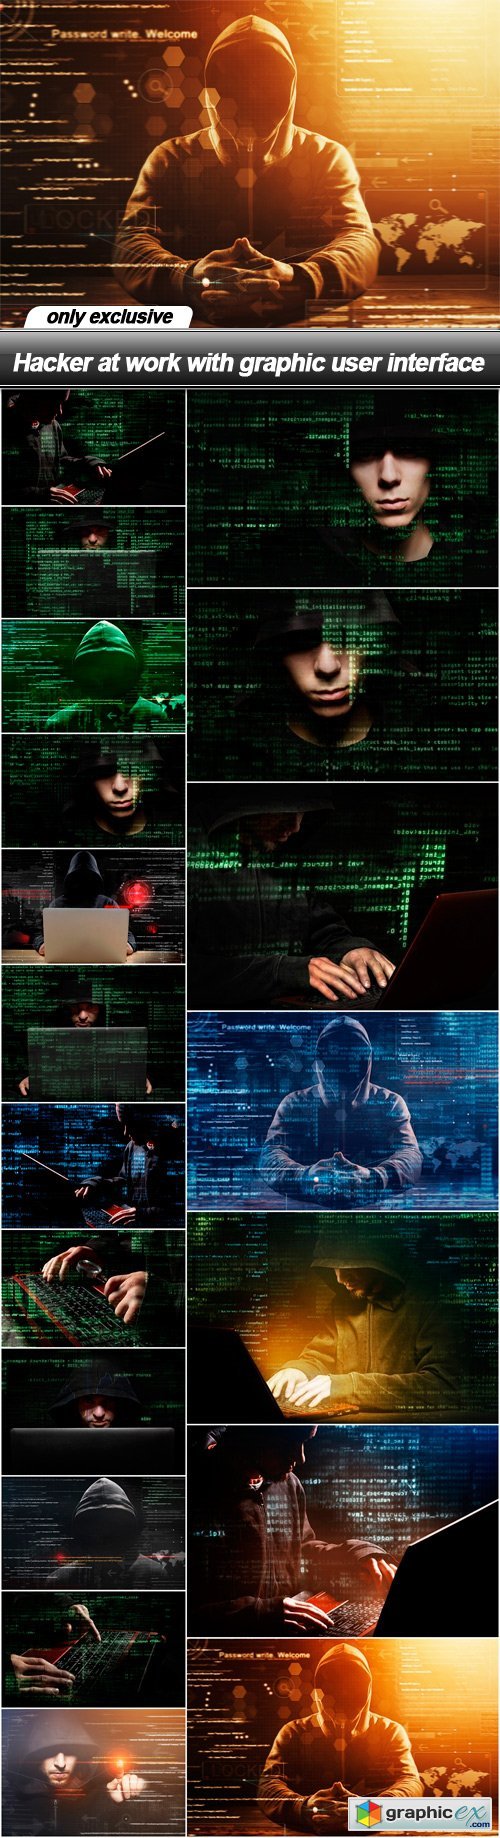 Hacker at work with graphic user interface - 19 UHQ JPEG